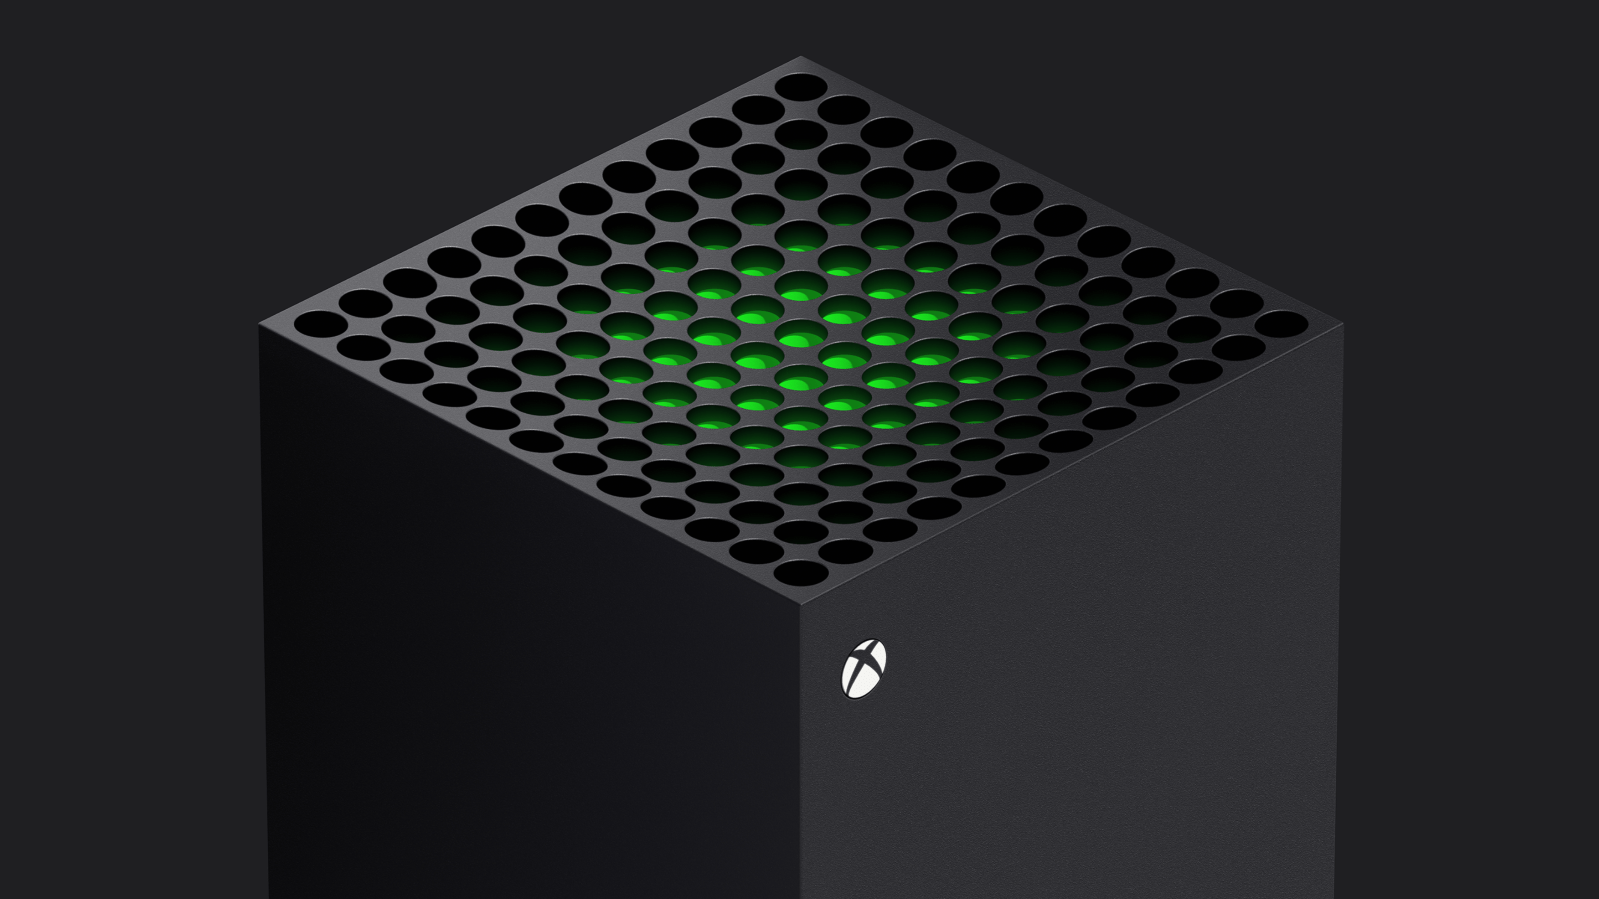 The honeycomb top of the Xbox Series X shown at a diagonal angle.